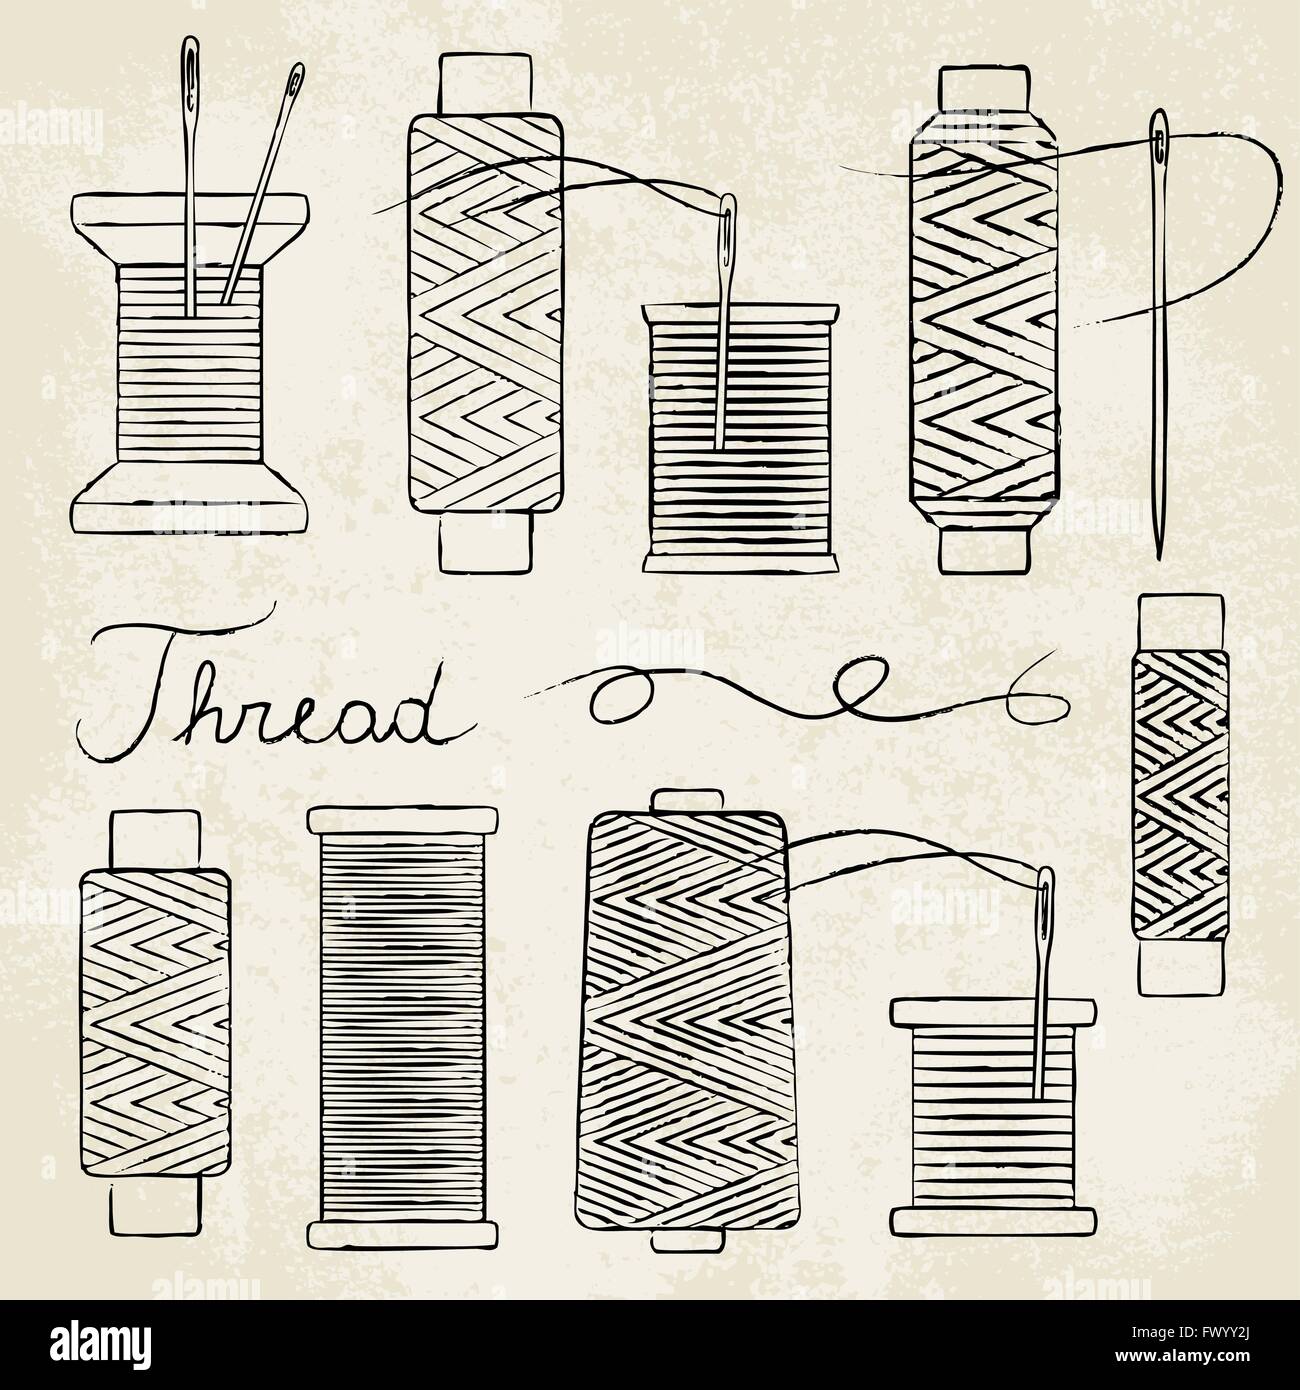 Spools of thread with needle Royalty Free Vector Image